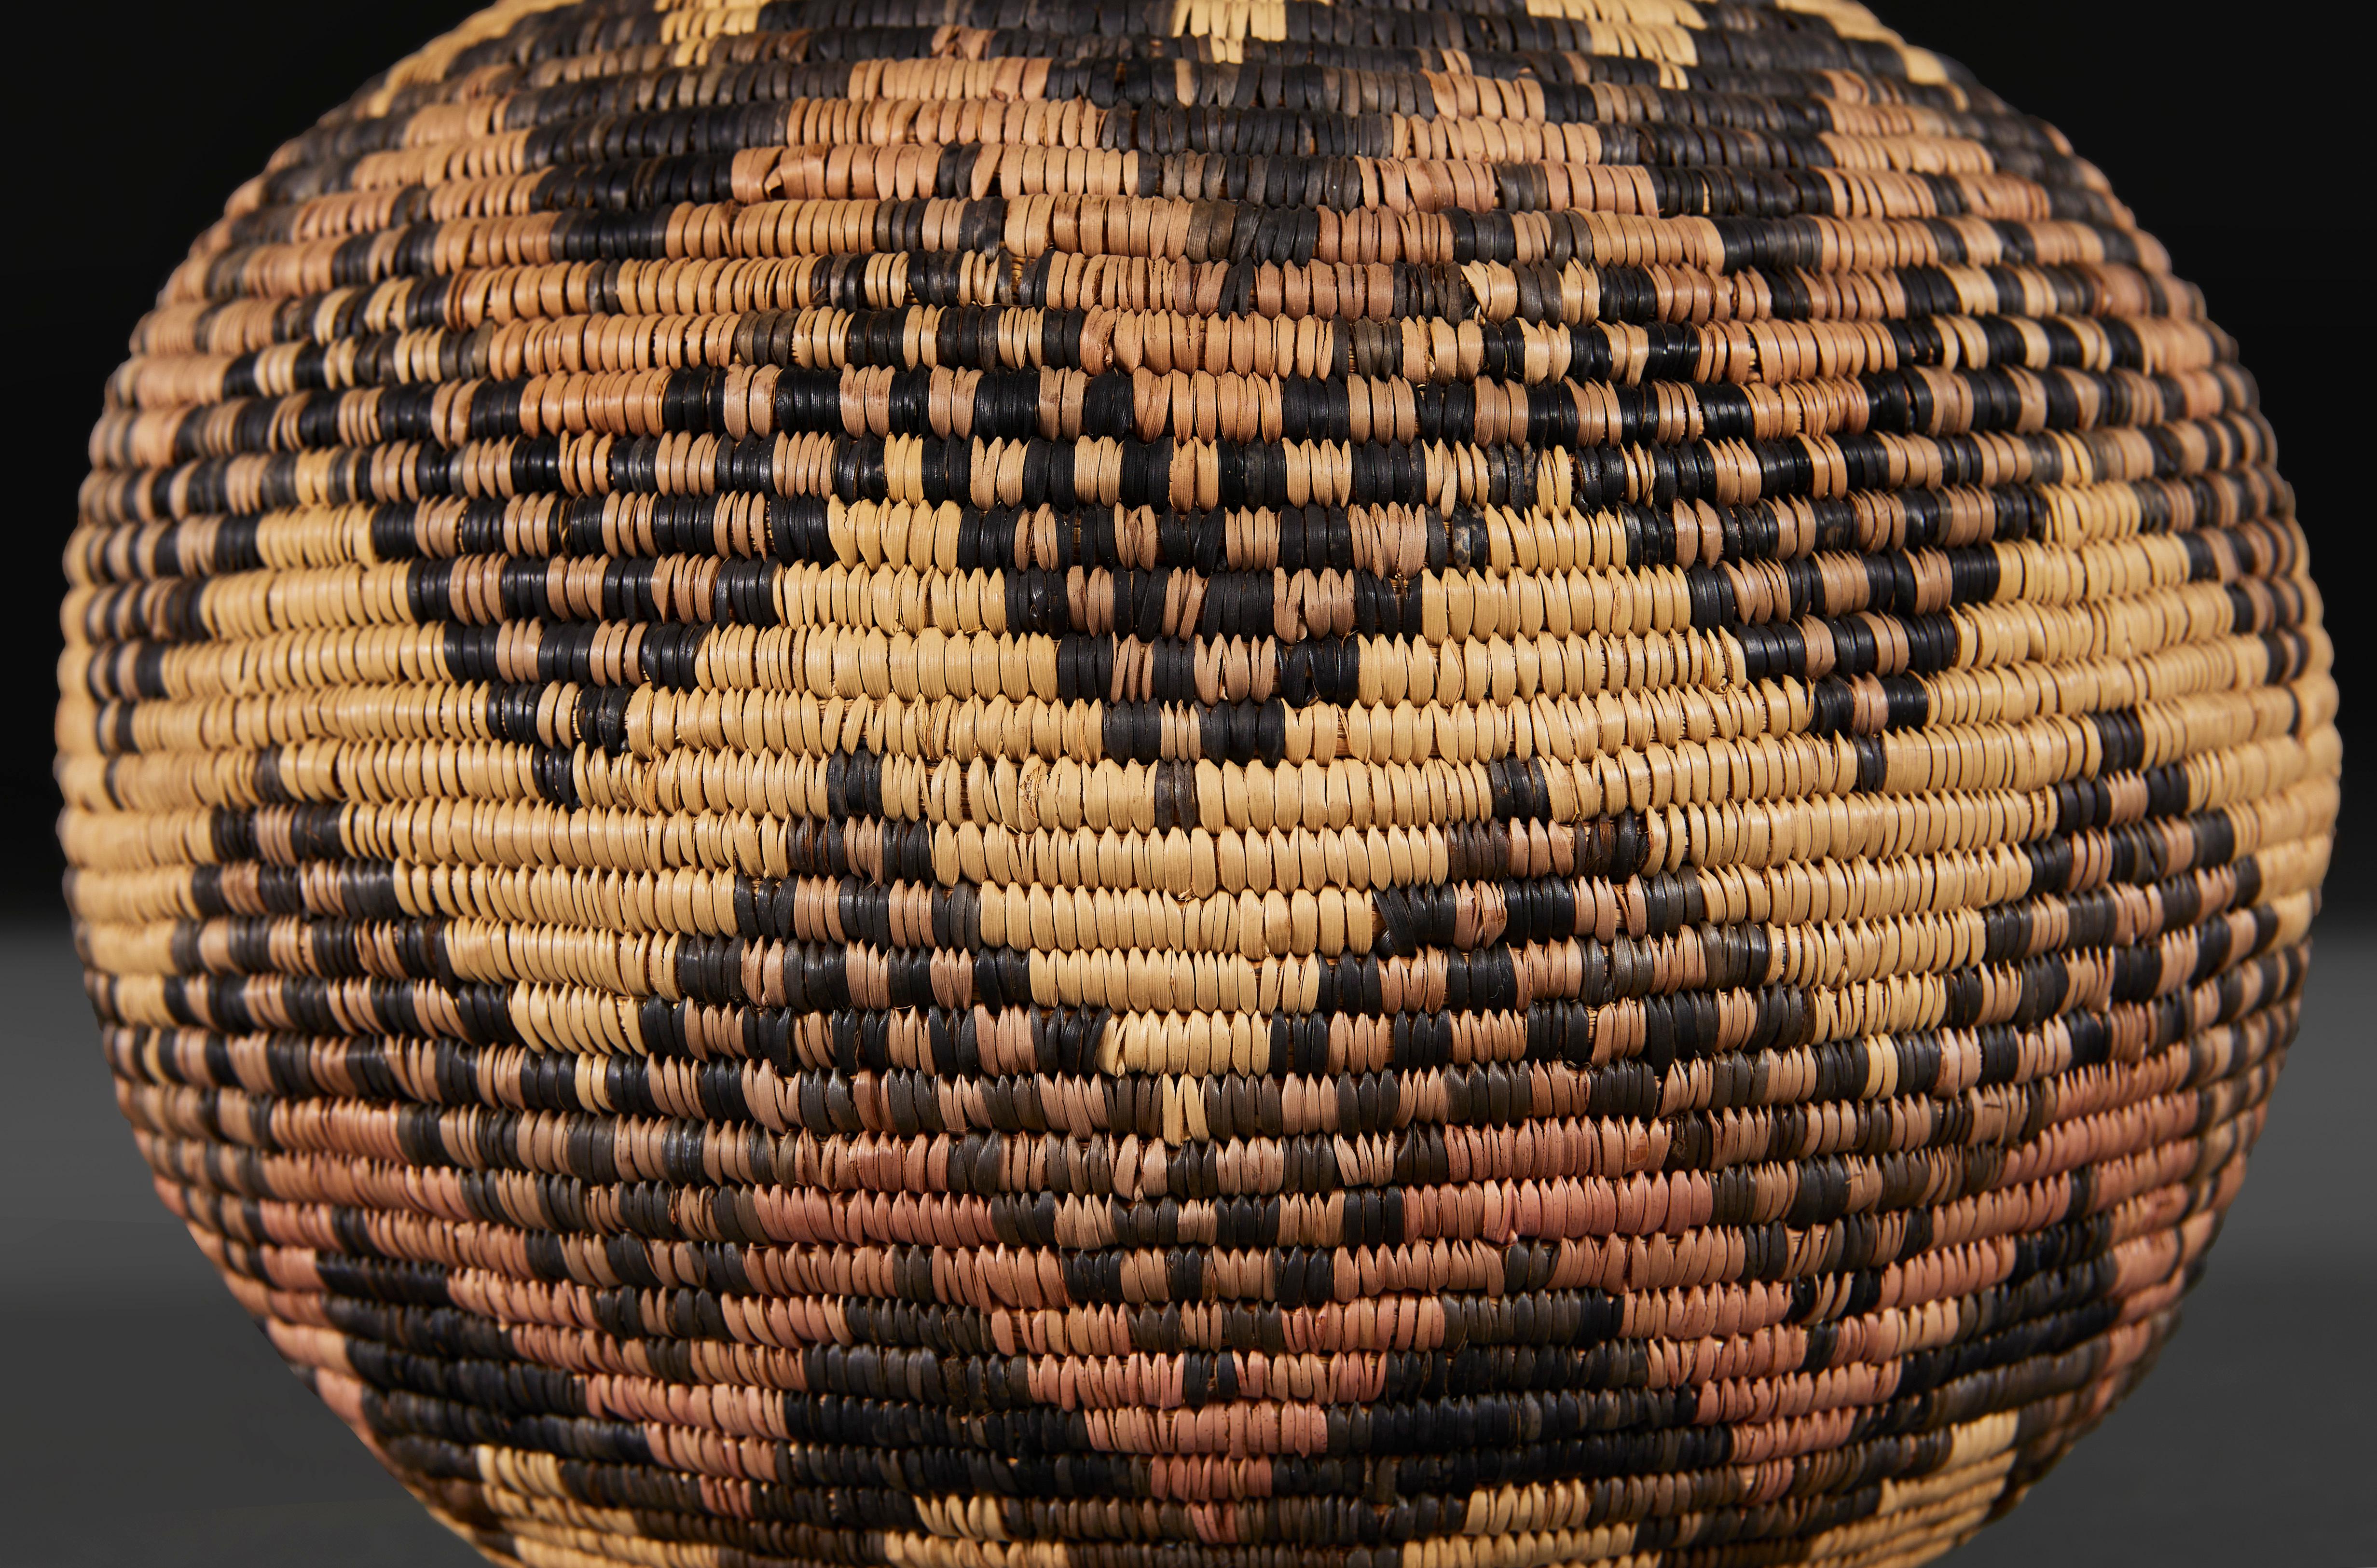 Hand-Woven A Zigzag Basket Weave Lamp